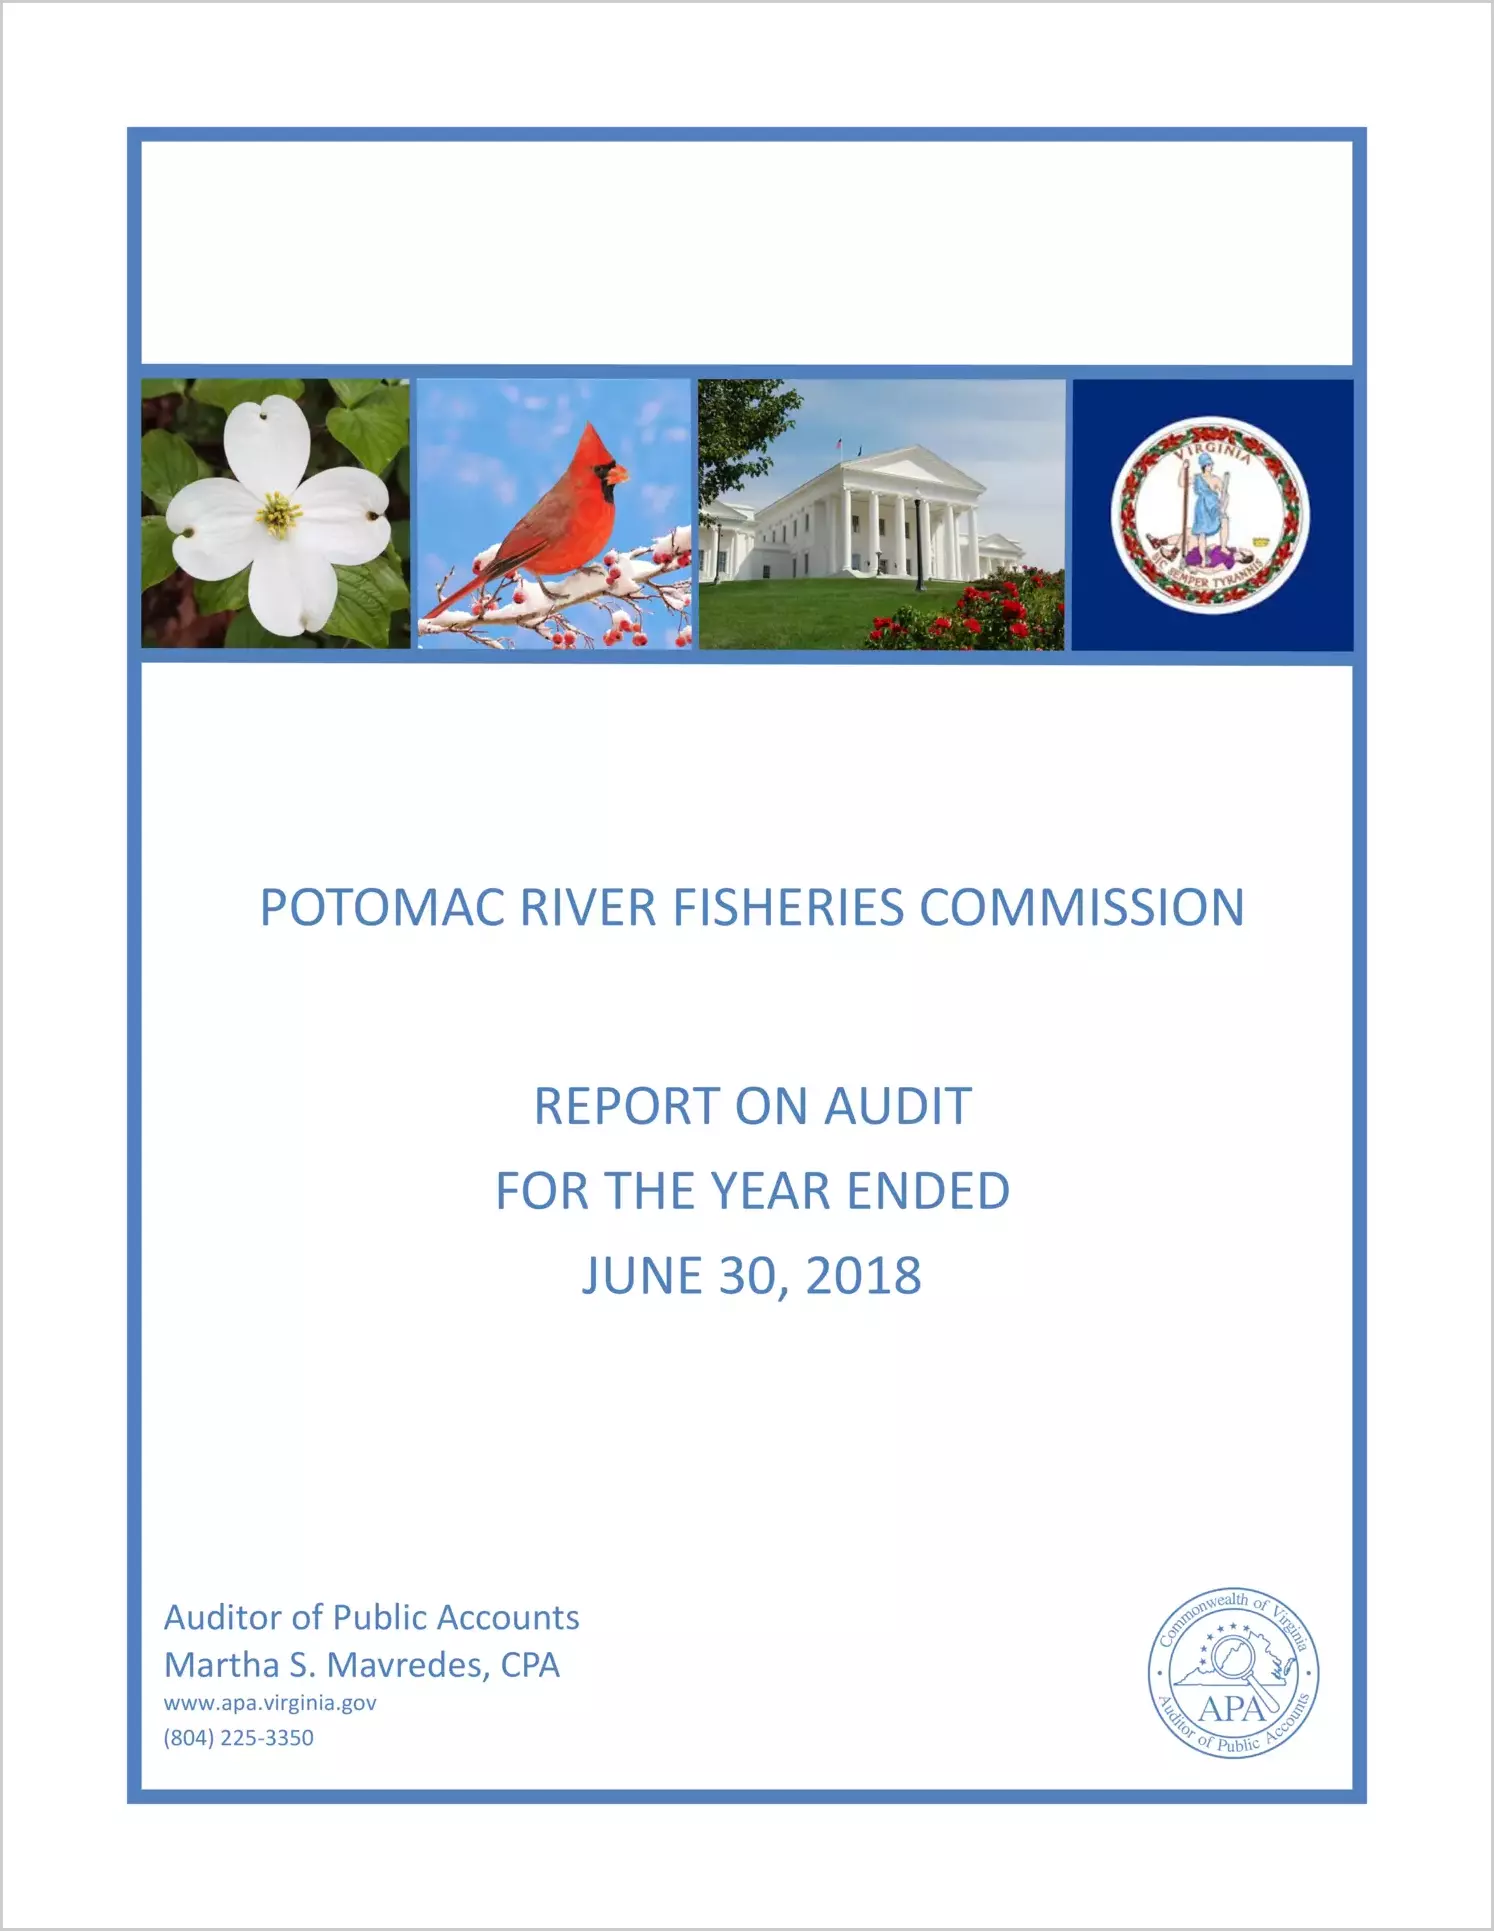 Potomac River Fisheries Commission for the year ended June 30, 2018